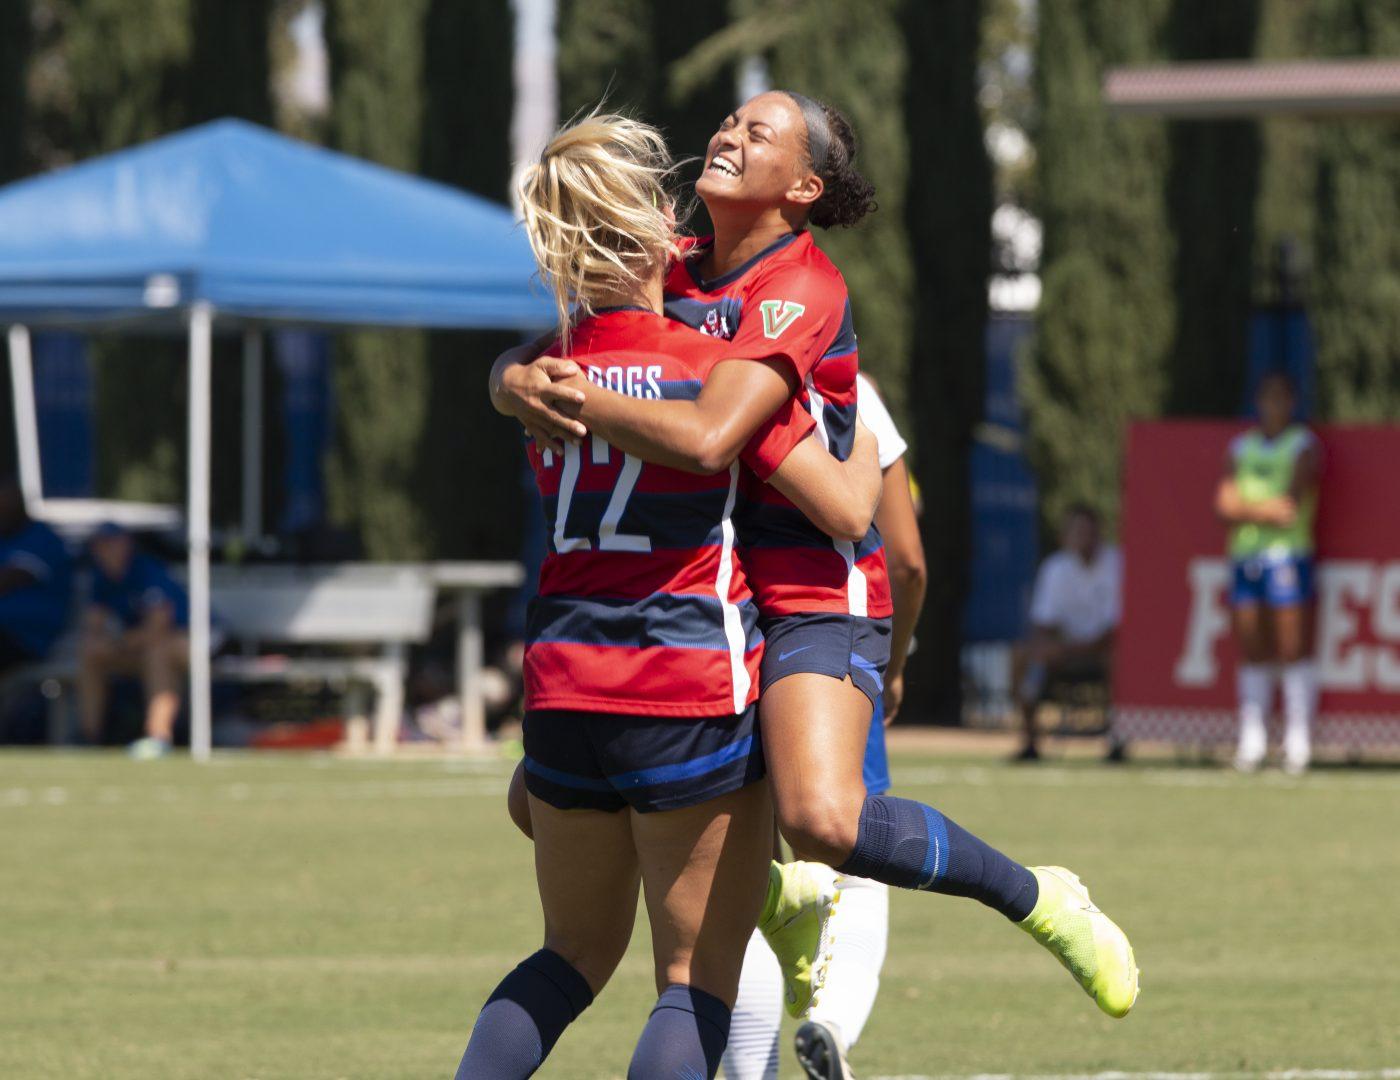 Fresno States defender Robyn McCarthy (left) and midfielder Sydni Lunt (right) embrace in celebration after Lunts goal during a match against UC Riverside at the Soccer and Lacrosse Stadium on Sunday, Sept. 22, 2019. (Jorge Rodriguez/The Collegian)